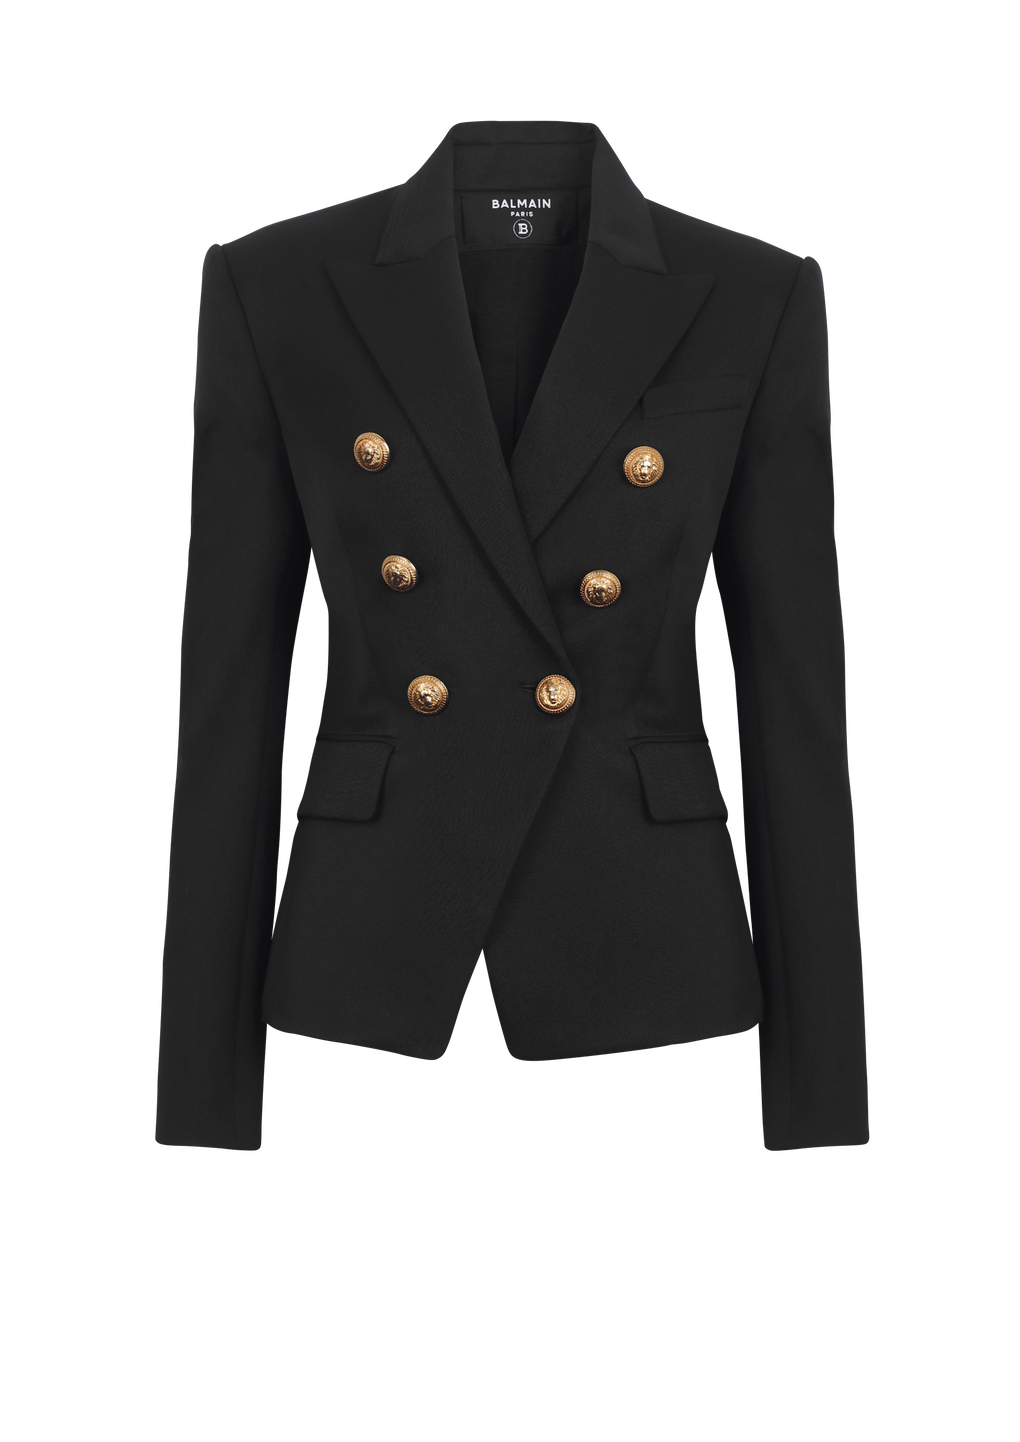 Wool double-breasted jacket, black, hi-res